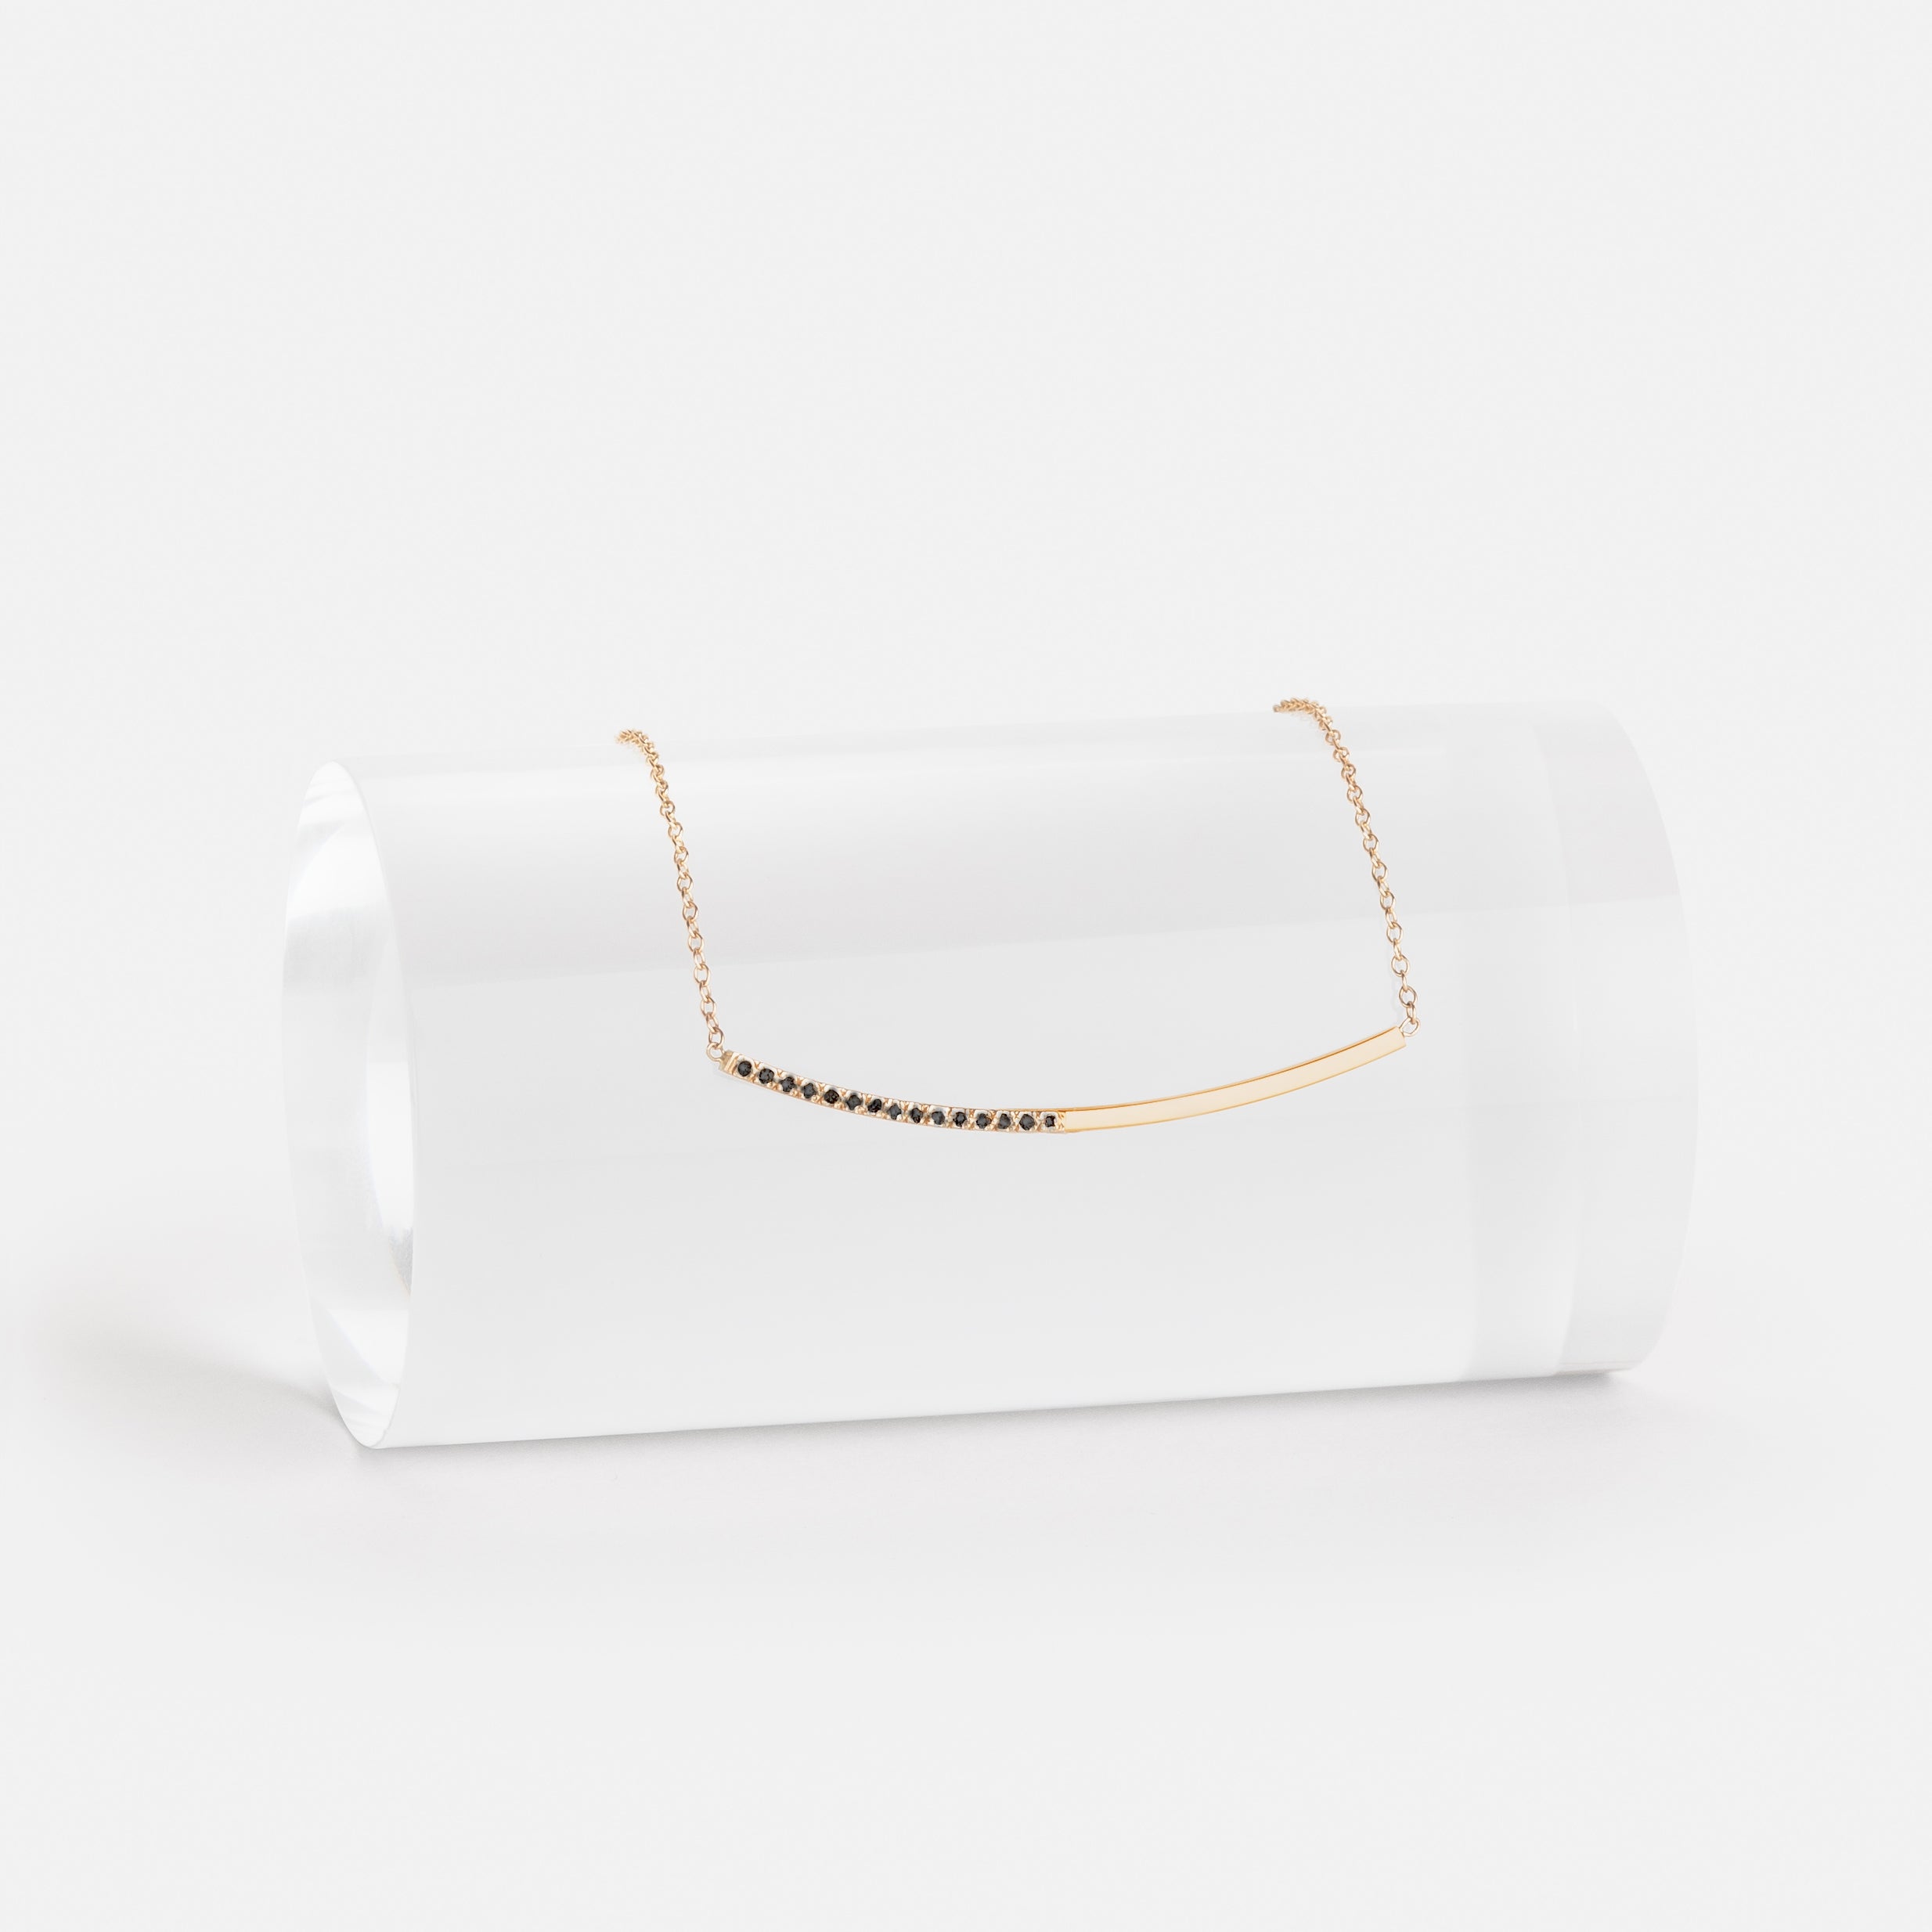 Iva Unconventional Choker in 14k Gold set with Black Diamonds By SHW Fine Jewelry NYC